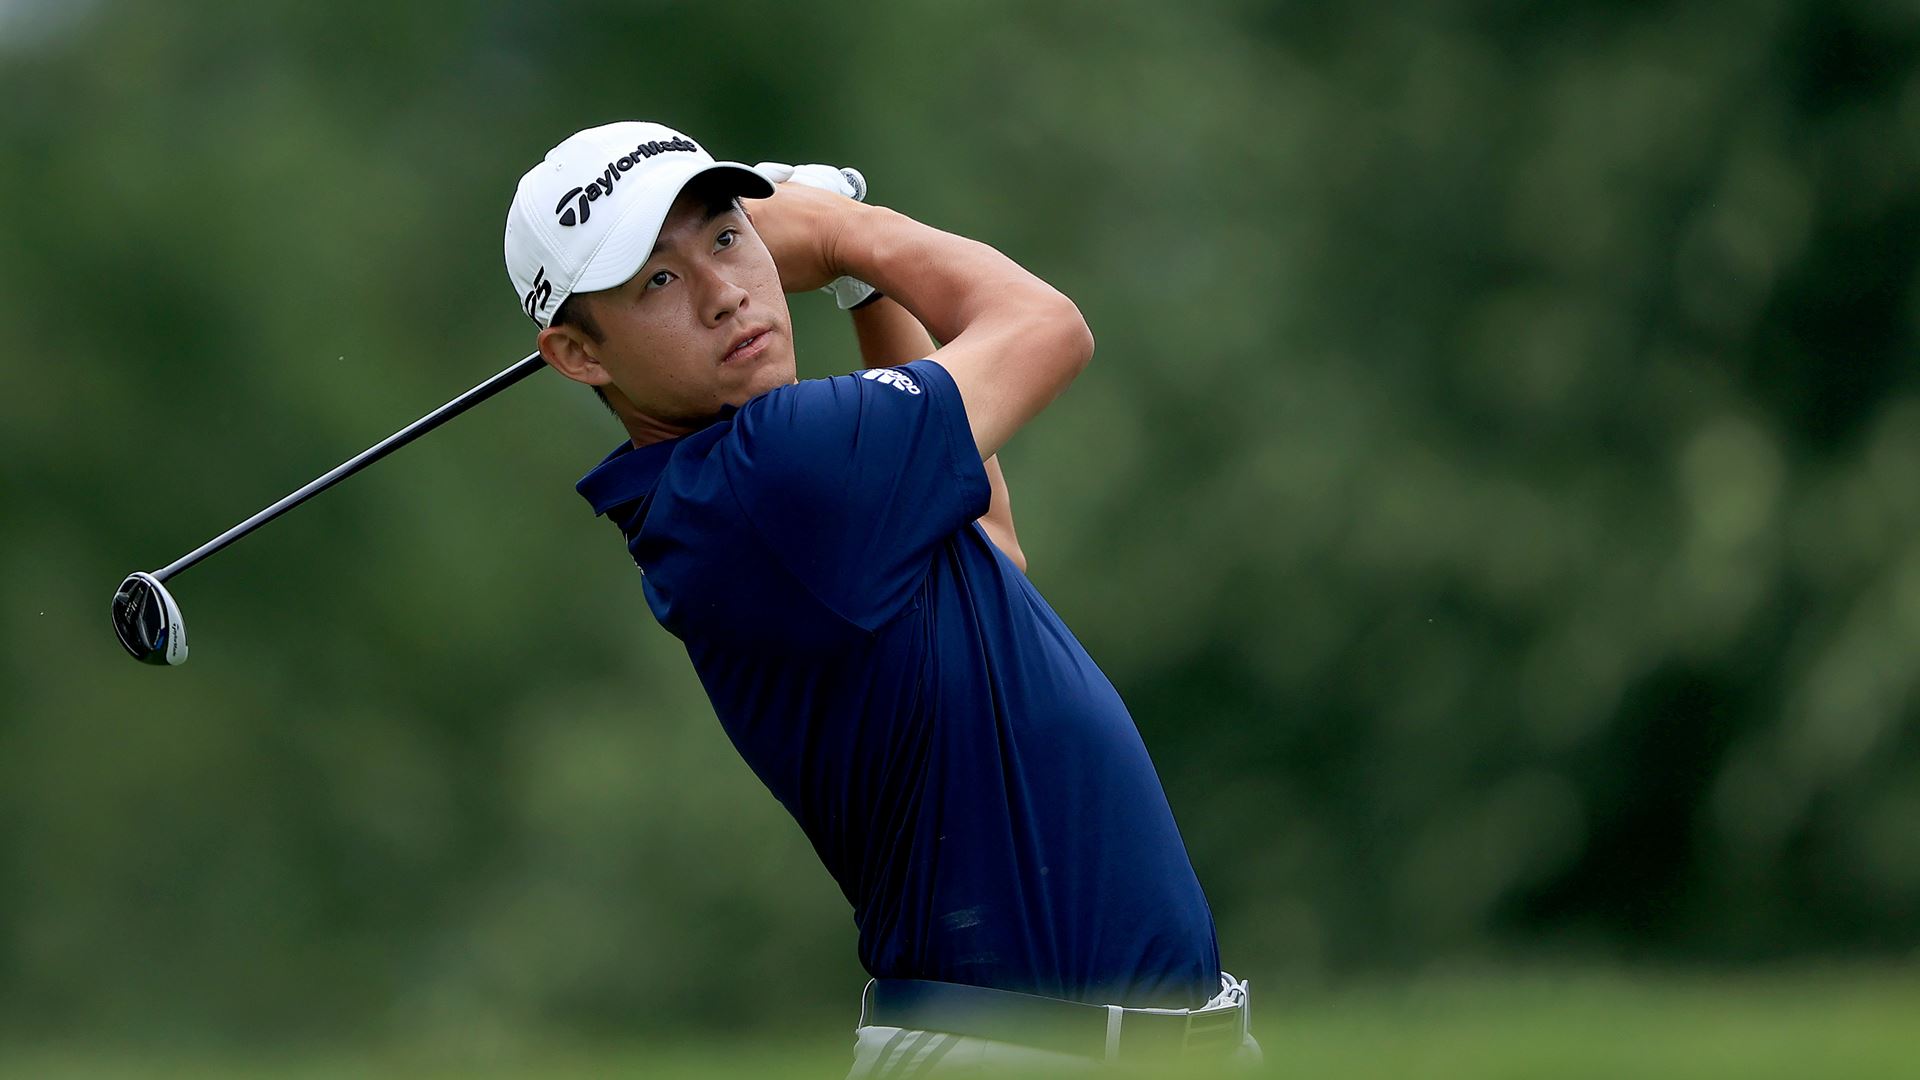 Collin Morikawa Wins Second PGA TOUR Title With Victory at Workday Charity Open